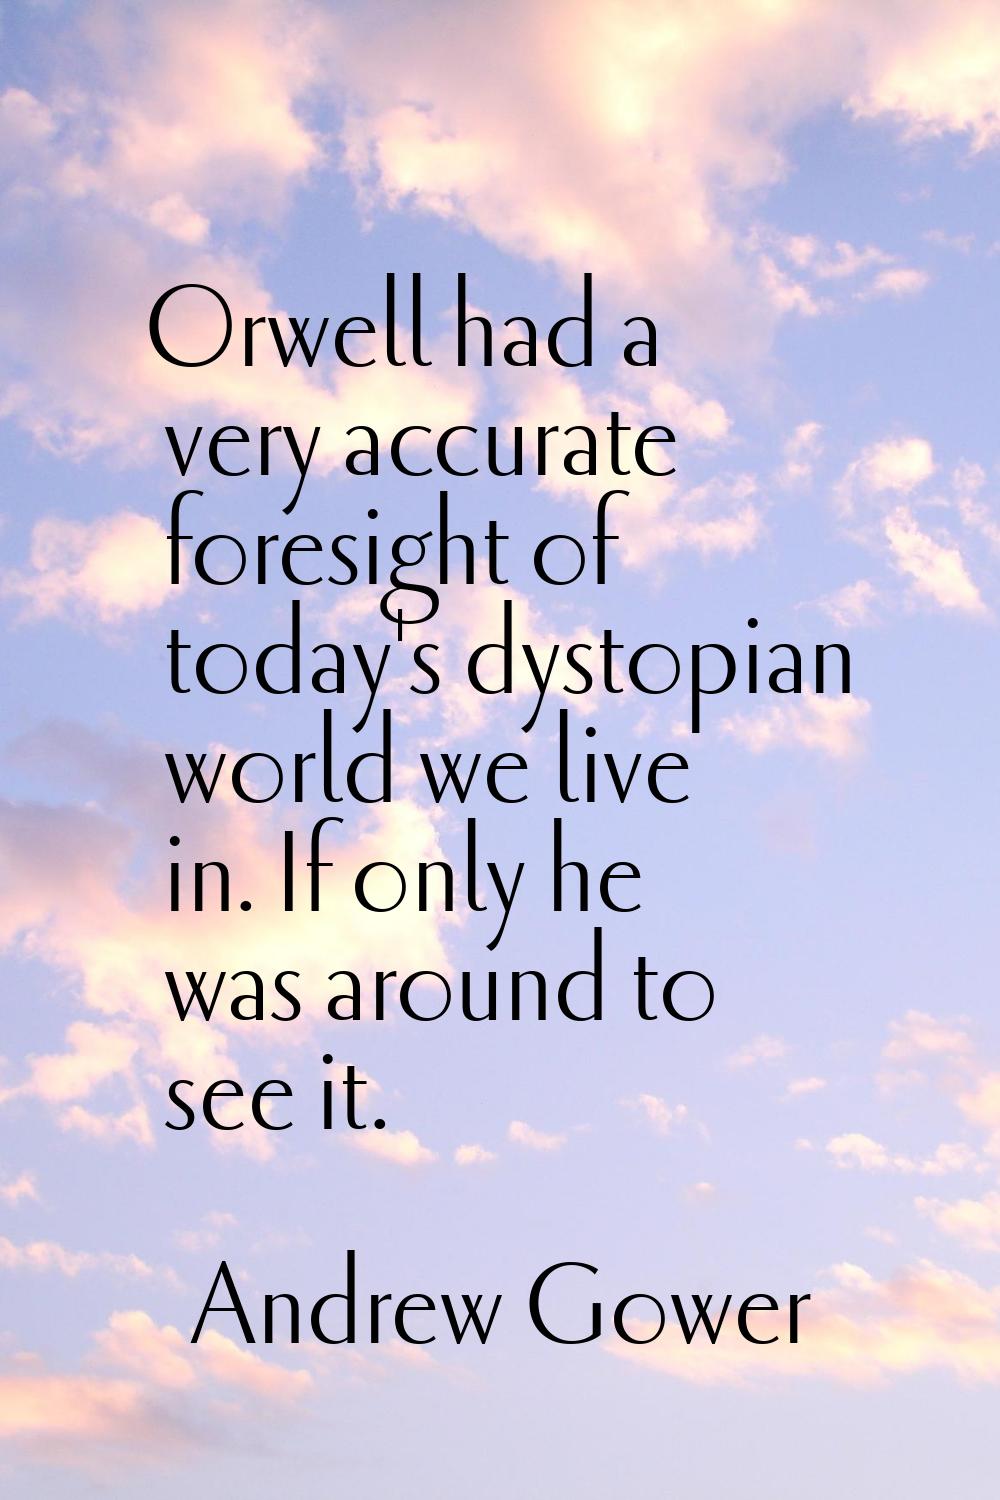 Orwell had a very accurate foresight of today's dystopian world we live in. If only he was around t